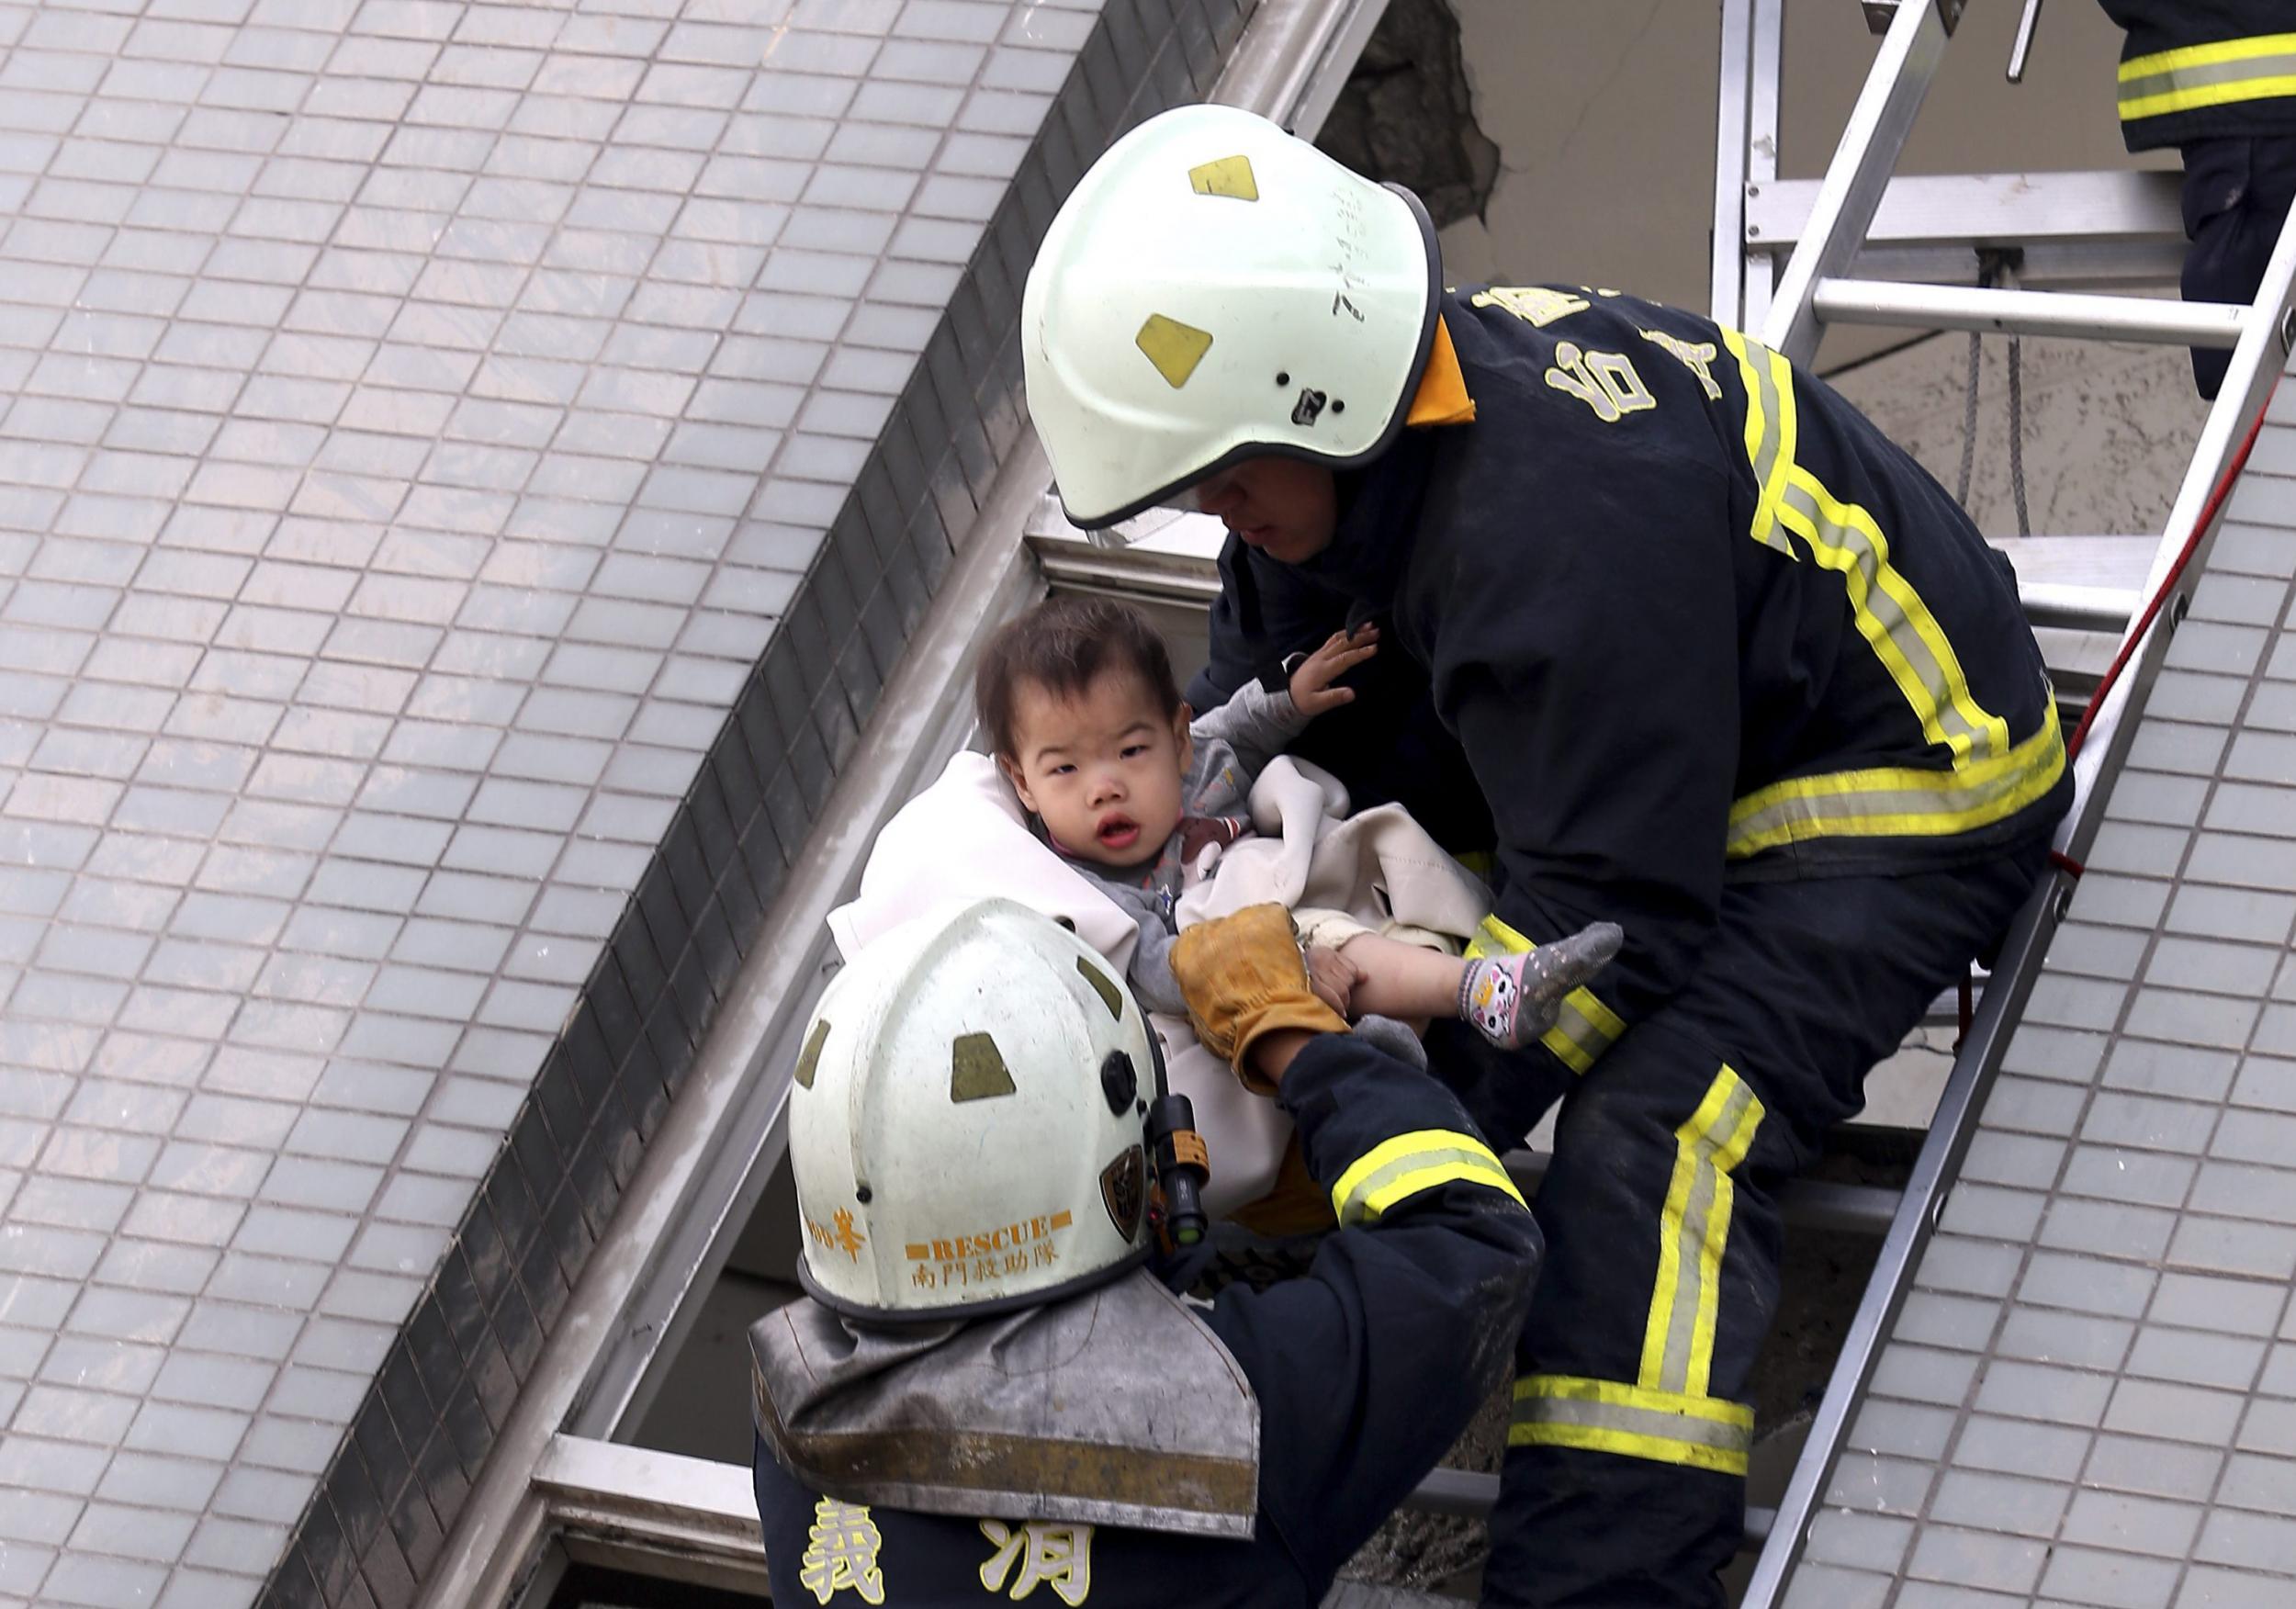 Firefighters rescuing toddler from collapsed building